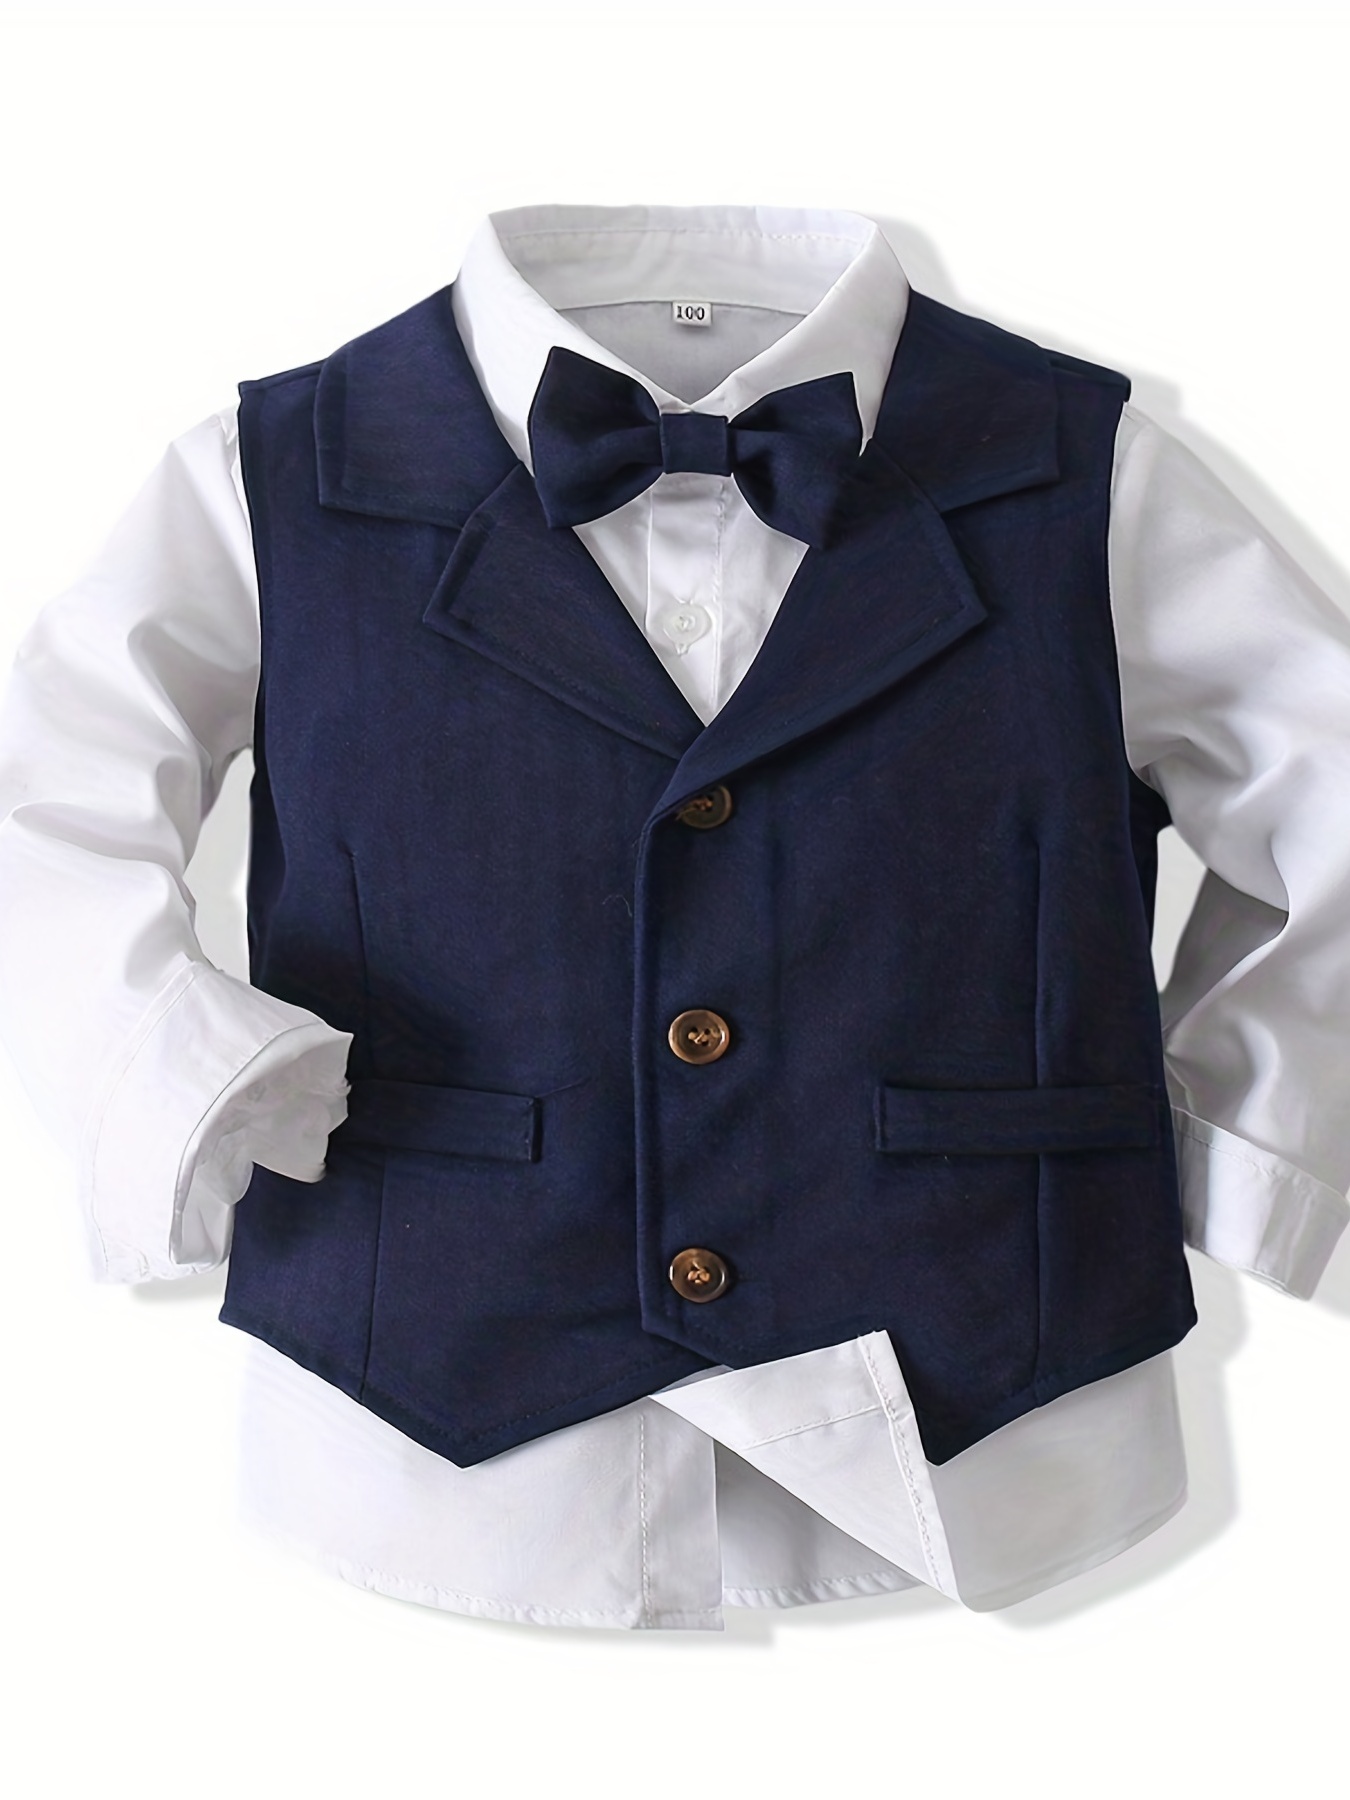  Baby Blue Suits Set Long Sleeve Casual Dress Shirts+Vest+BowTie+Pants  Outfits(0-6months): Clothing, Shoes & Jewelry